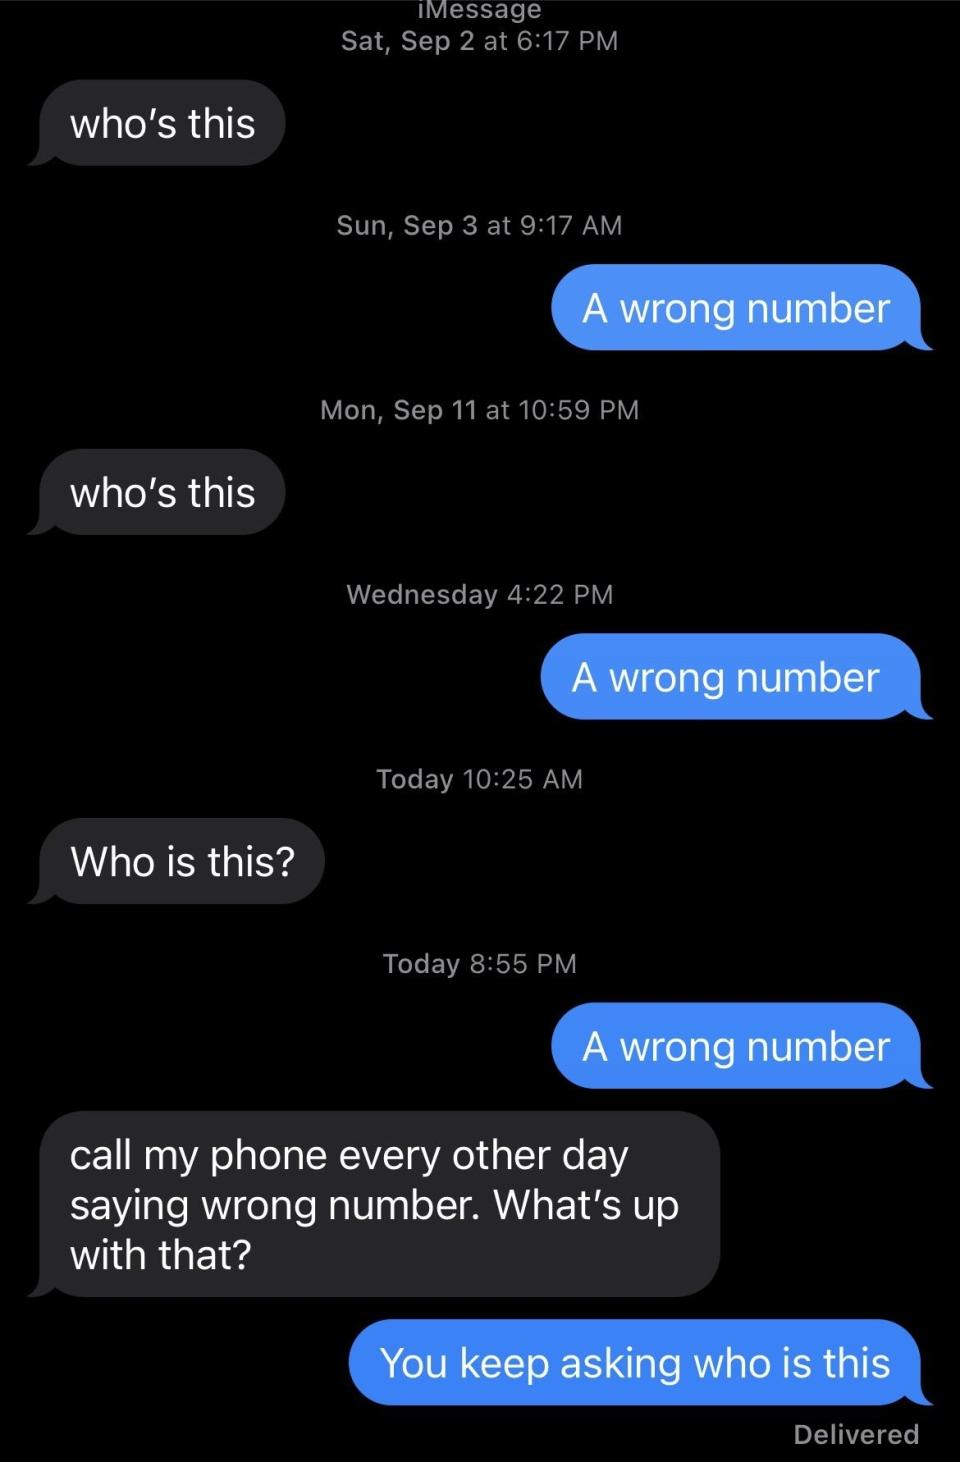 Text message exchange from September 2 to today. One person repeatedly asks "who's this," and the other person consistently replies "A wrong number." Final reply says, "You keep asking who is this."